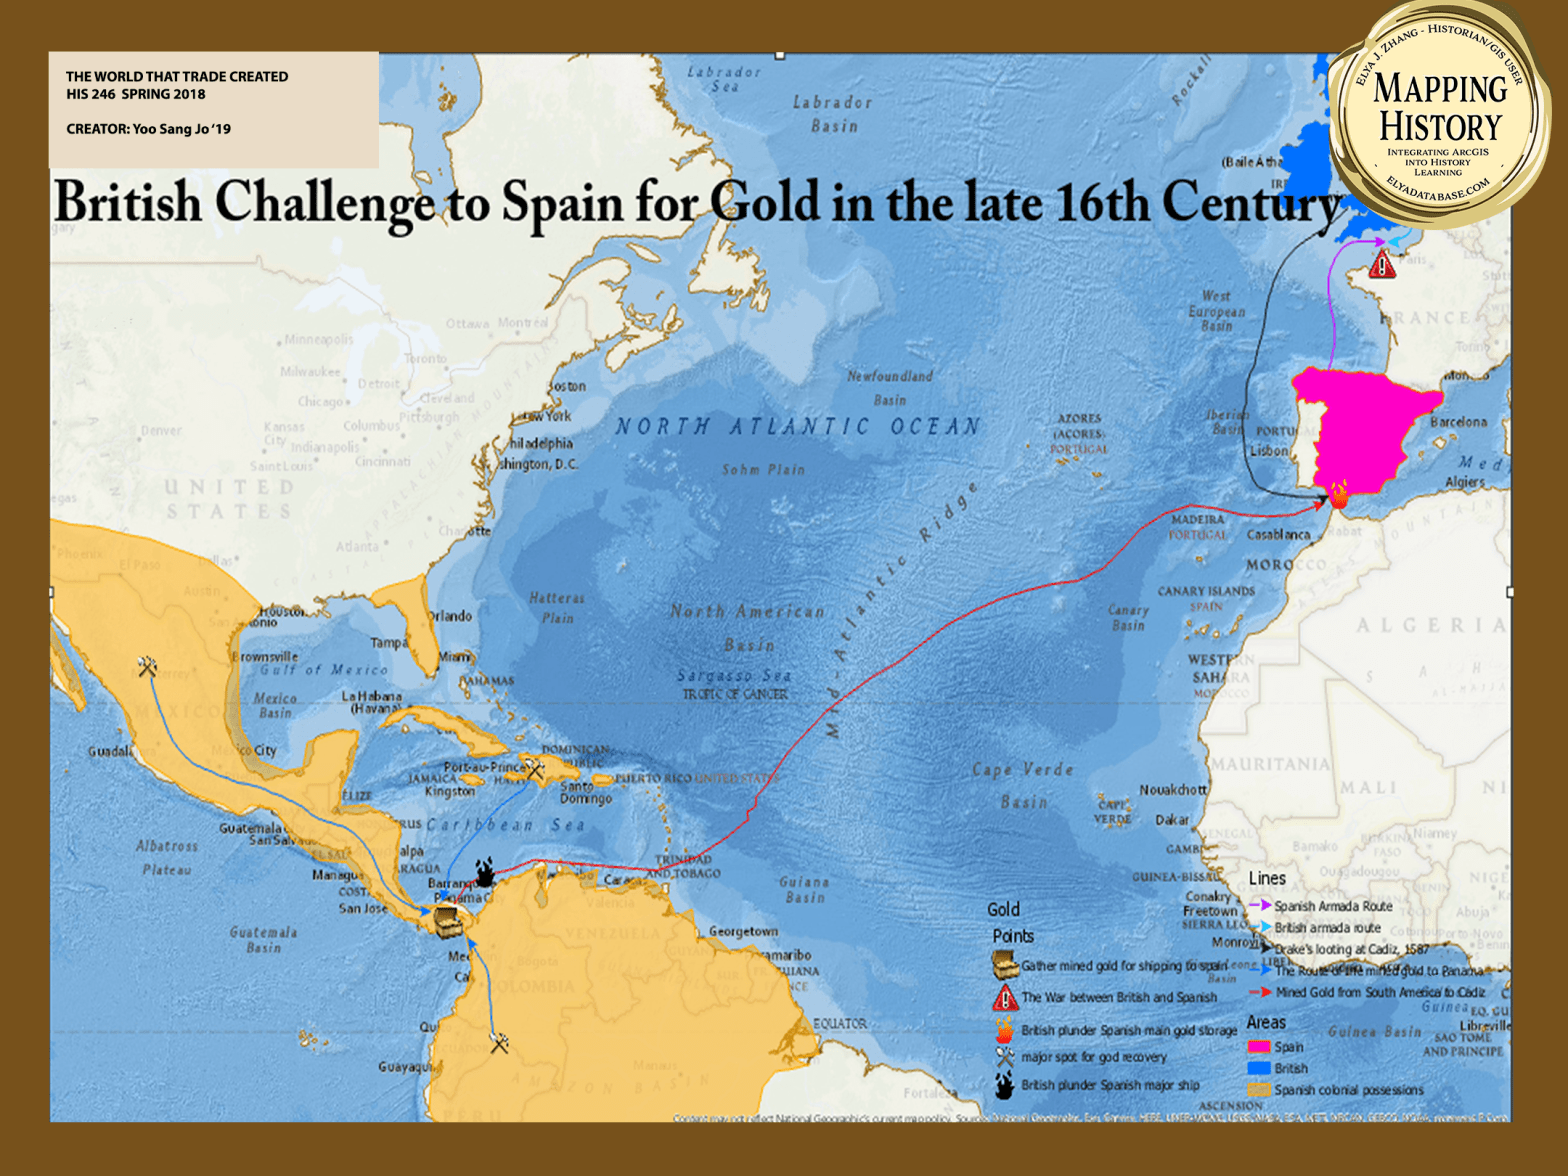 British Challenge to Spain for Gold in the Late 16th Century